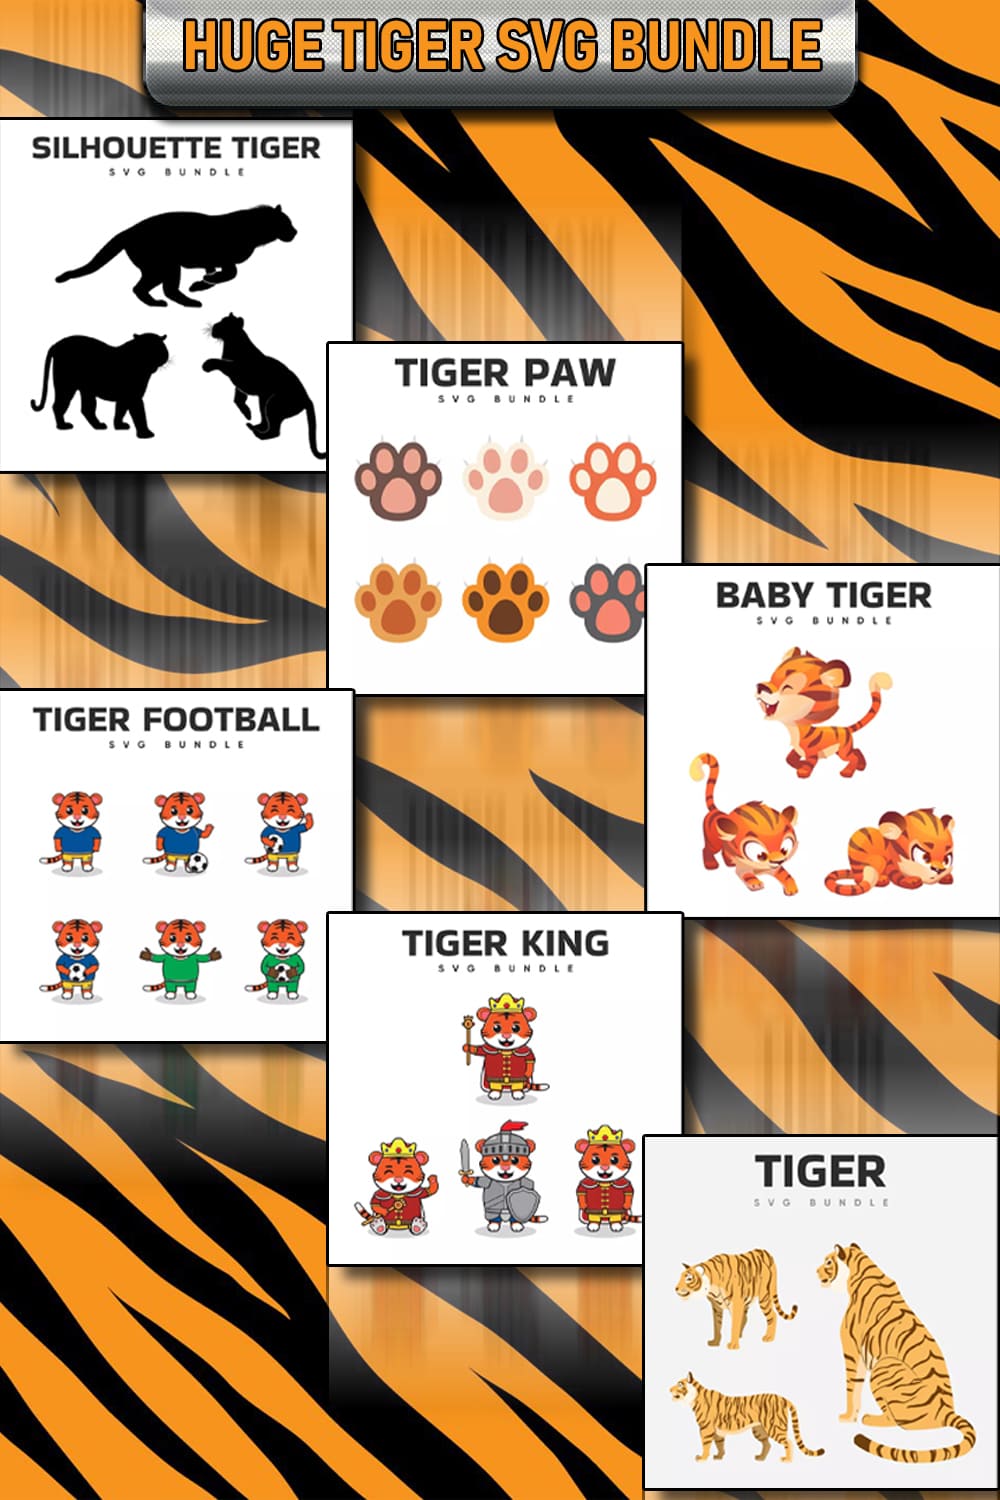 Tiger and tiger stripes background with different animal designs.